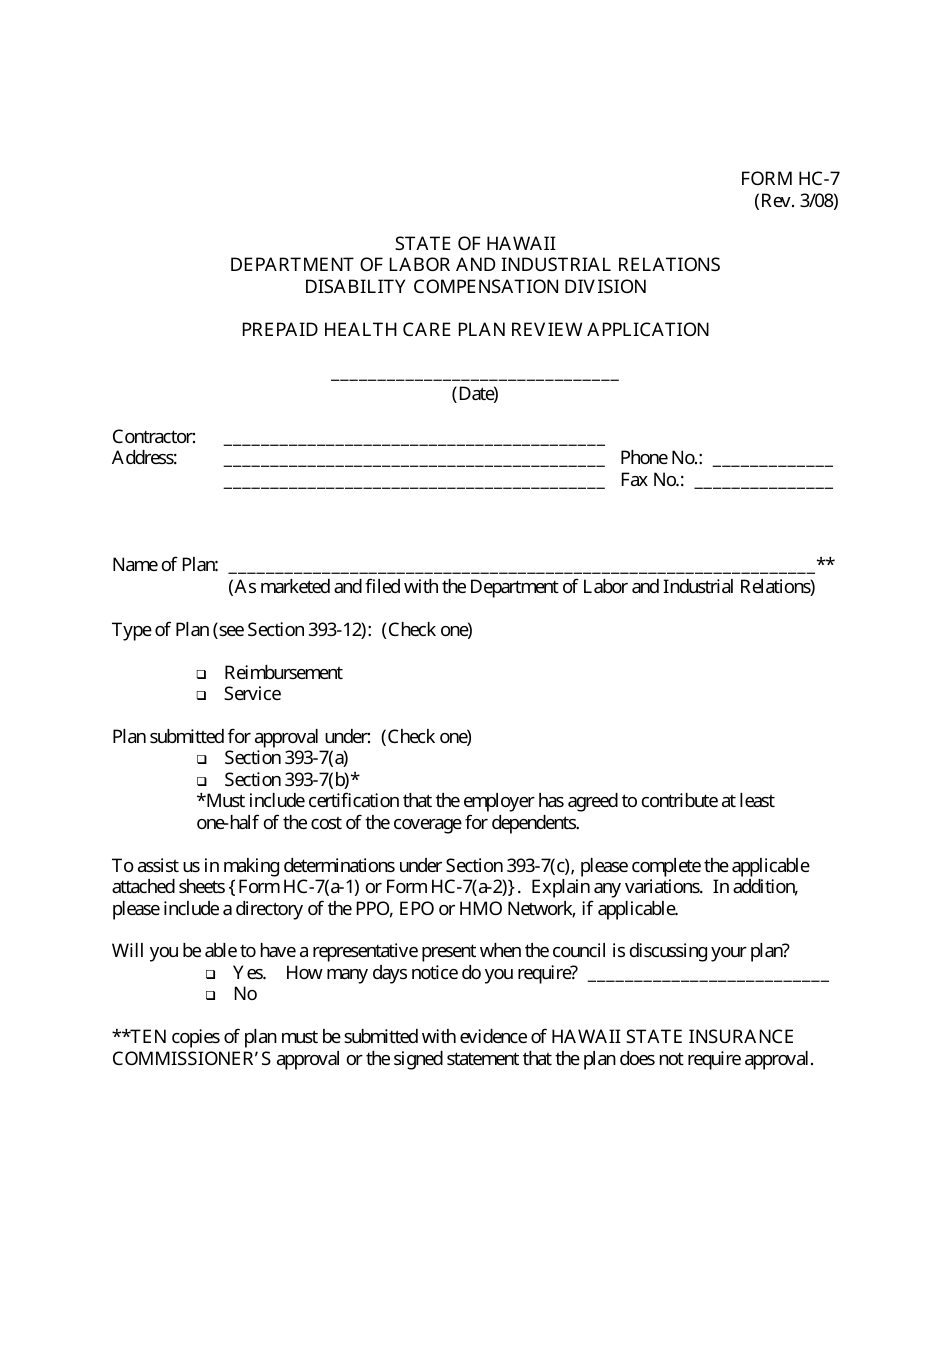 Form HC7 Fill Out, Sign Online and Download Printable PDF, Hawaii